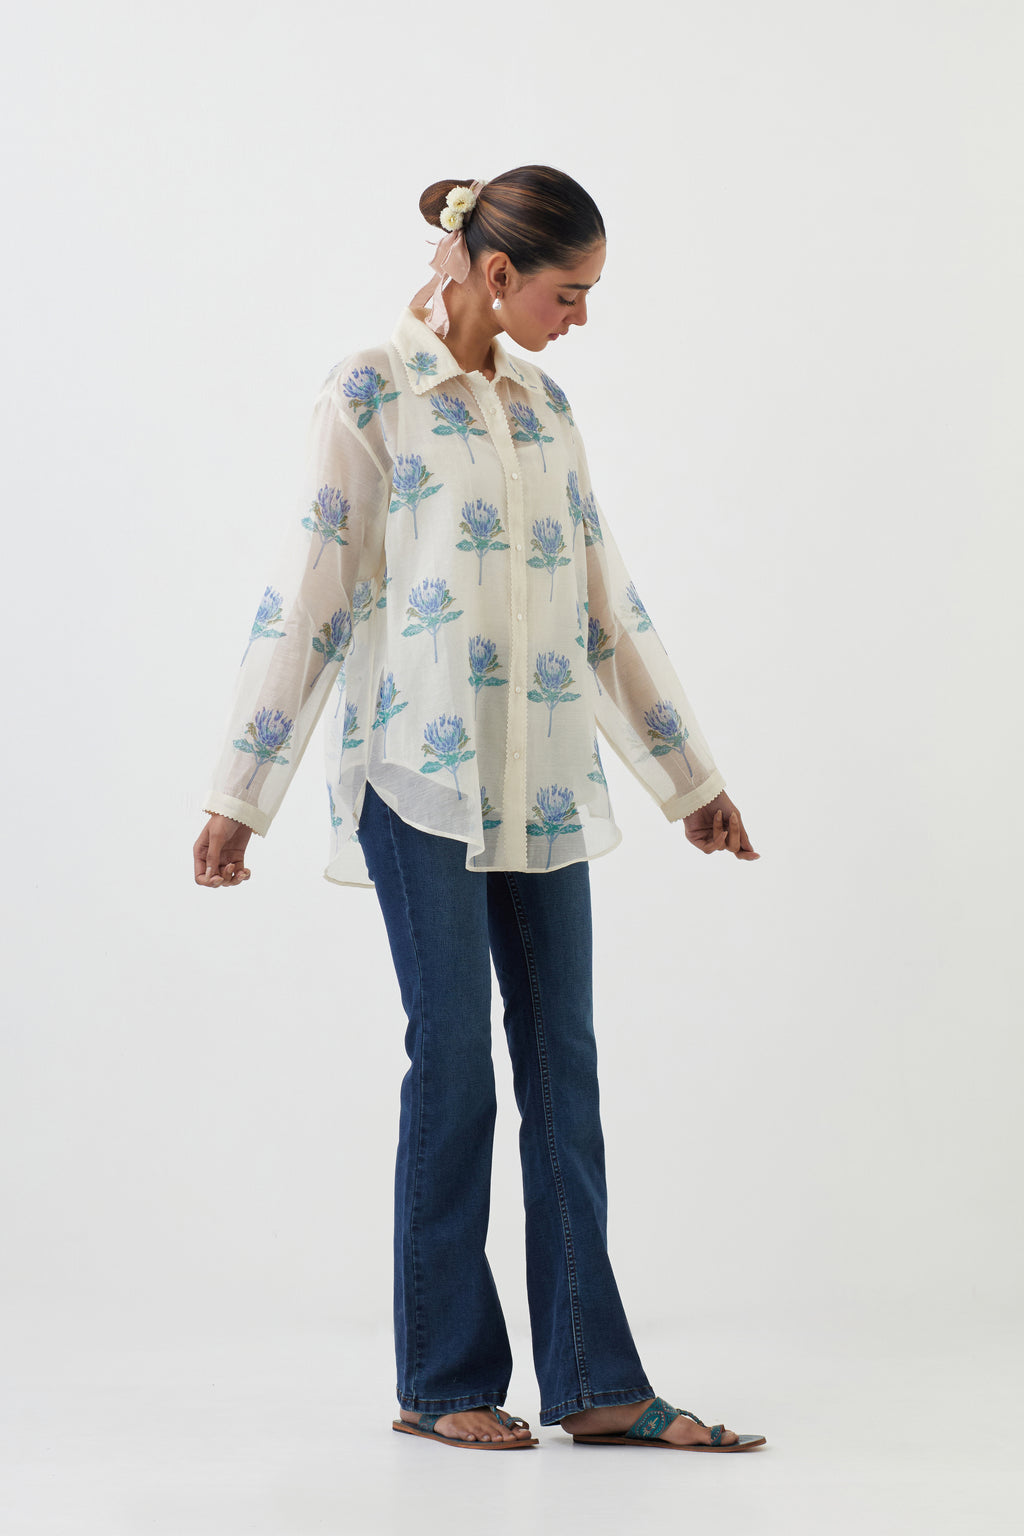 Off white cotton chanderi shirt with all-over blue floral hand block print and full sleeves.